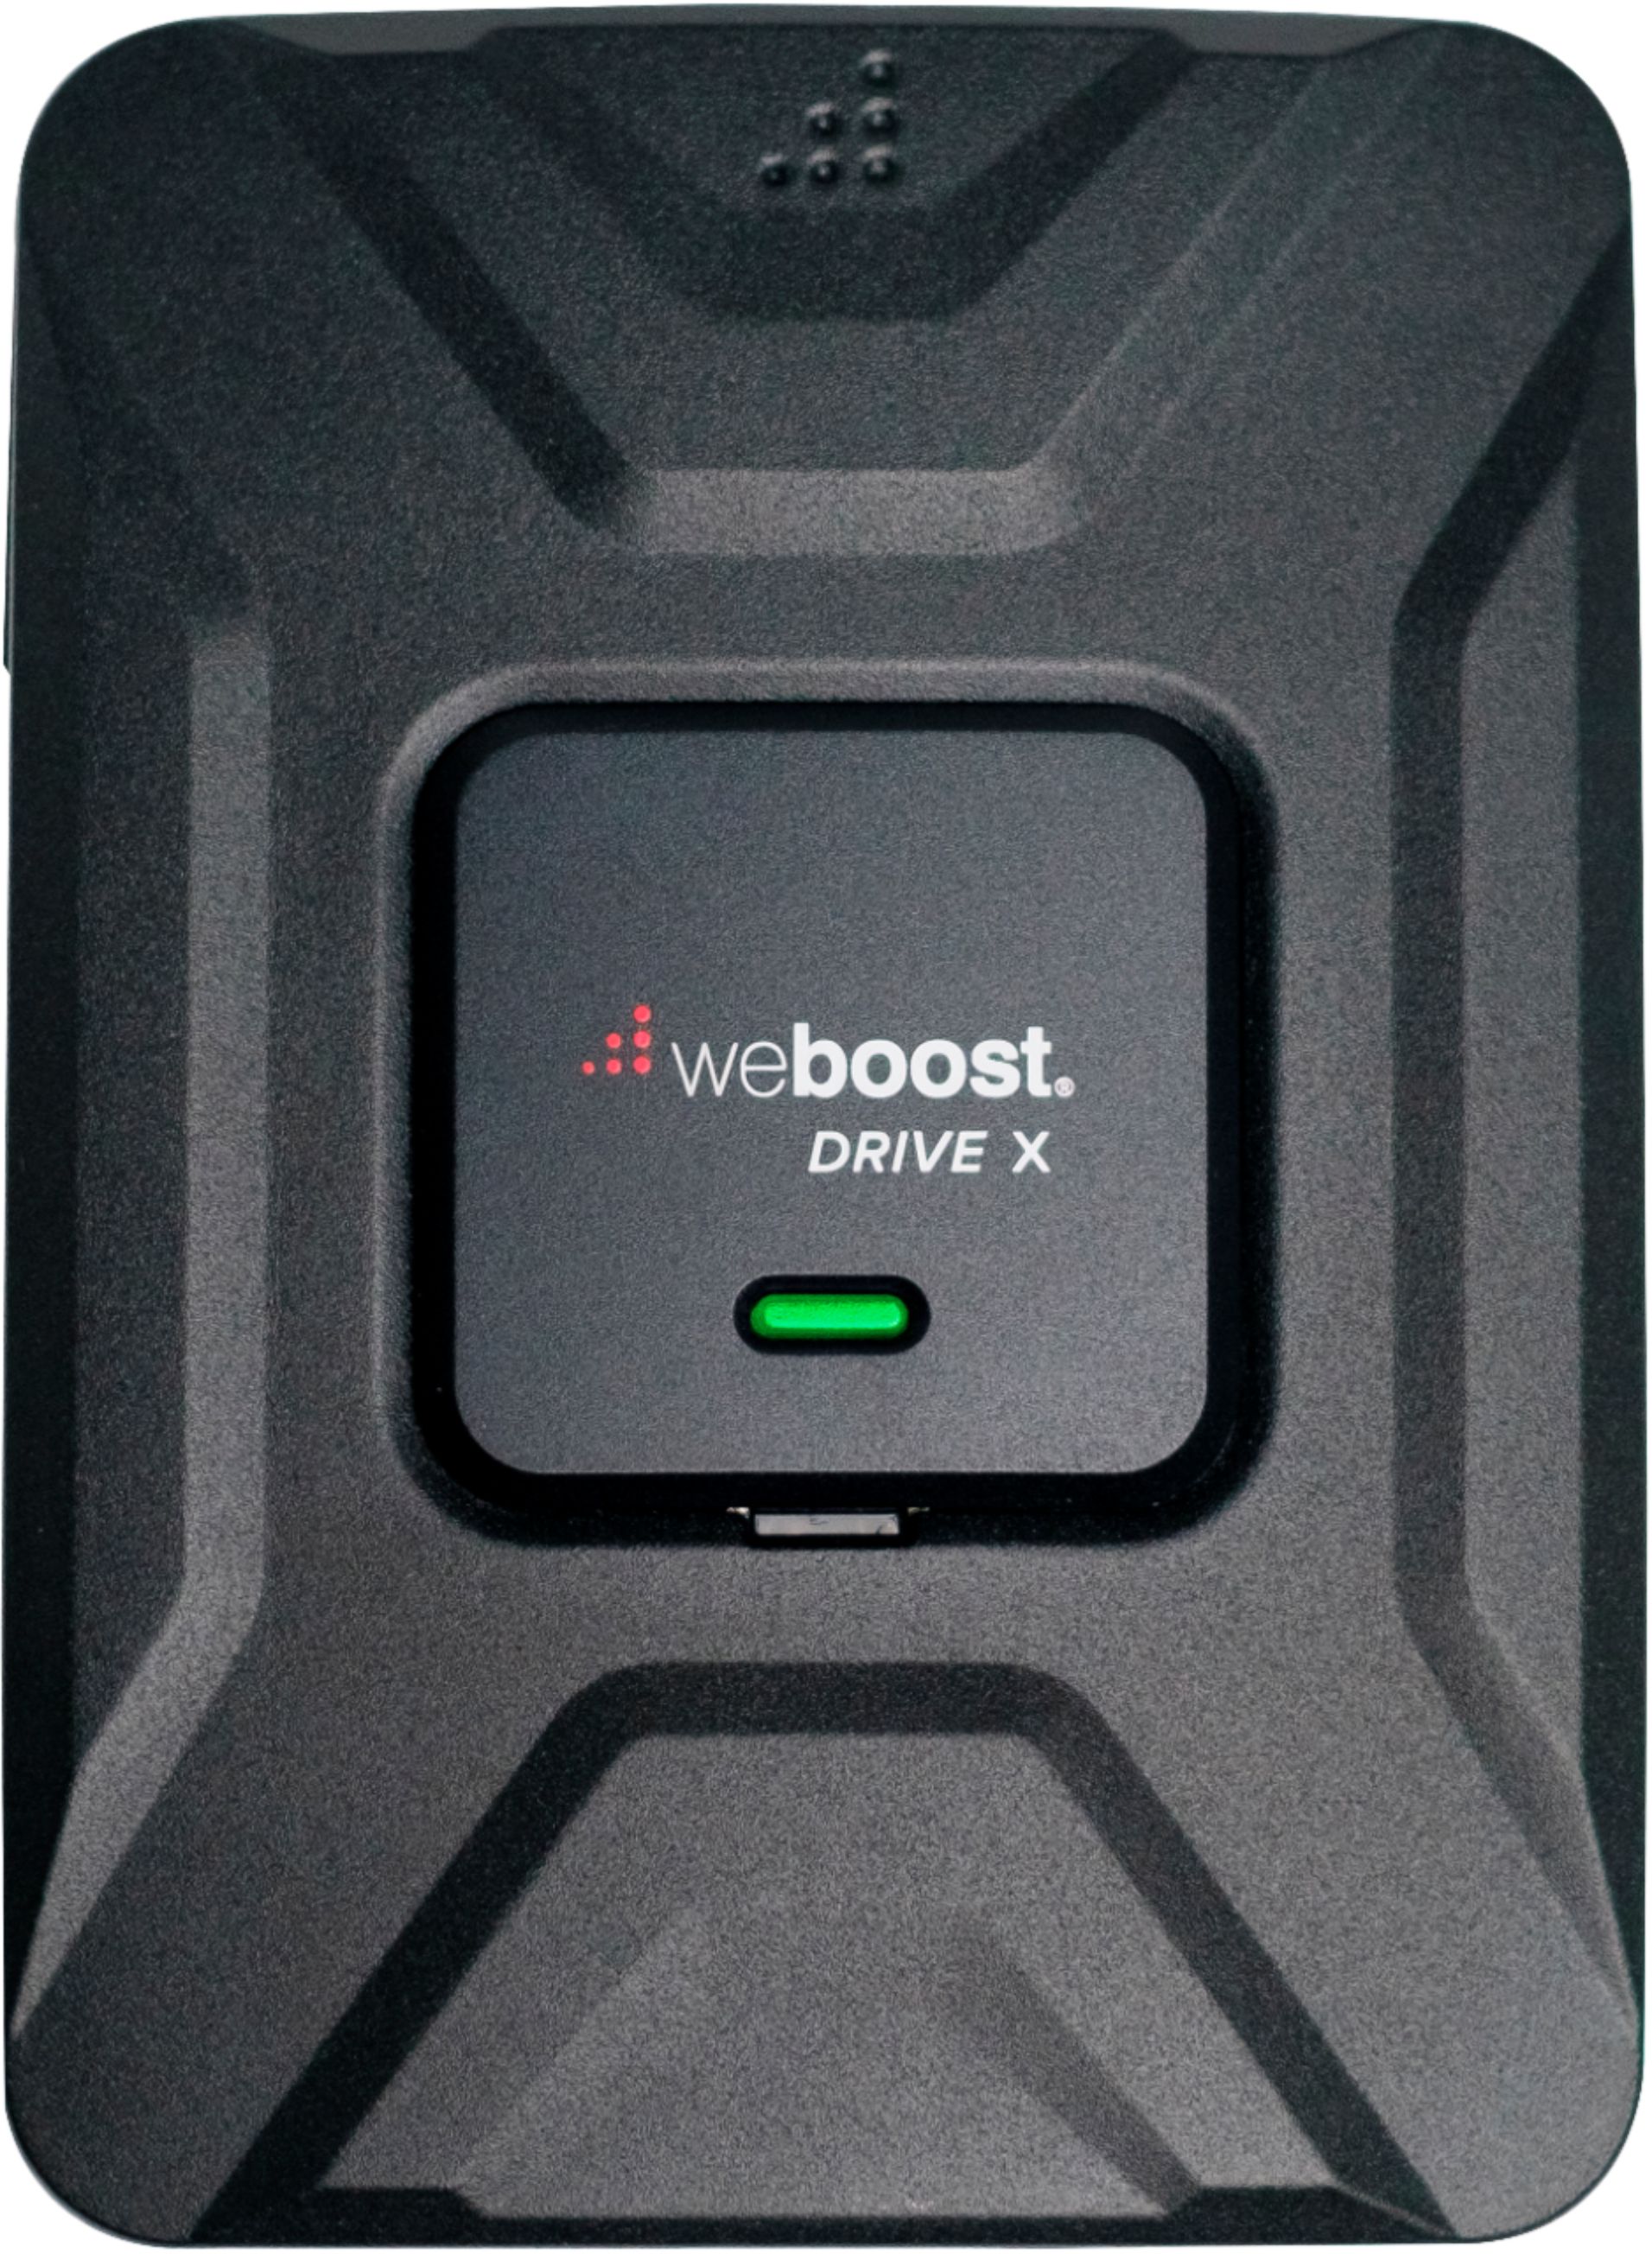 Left View: weBoost - Drive X Vehicle Cell Phone Signal Booster for Car, Truck, Van, or SUV, Boosts 5G & 4G LTE for All U.S. Carriers - Black